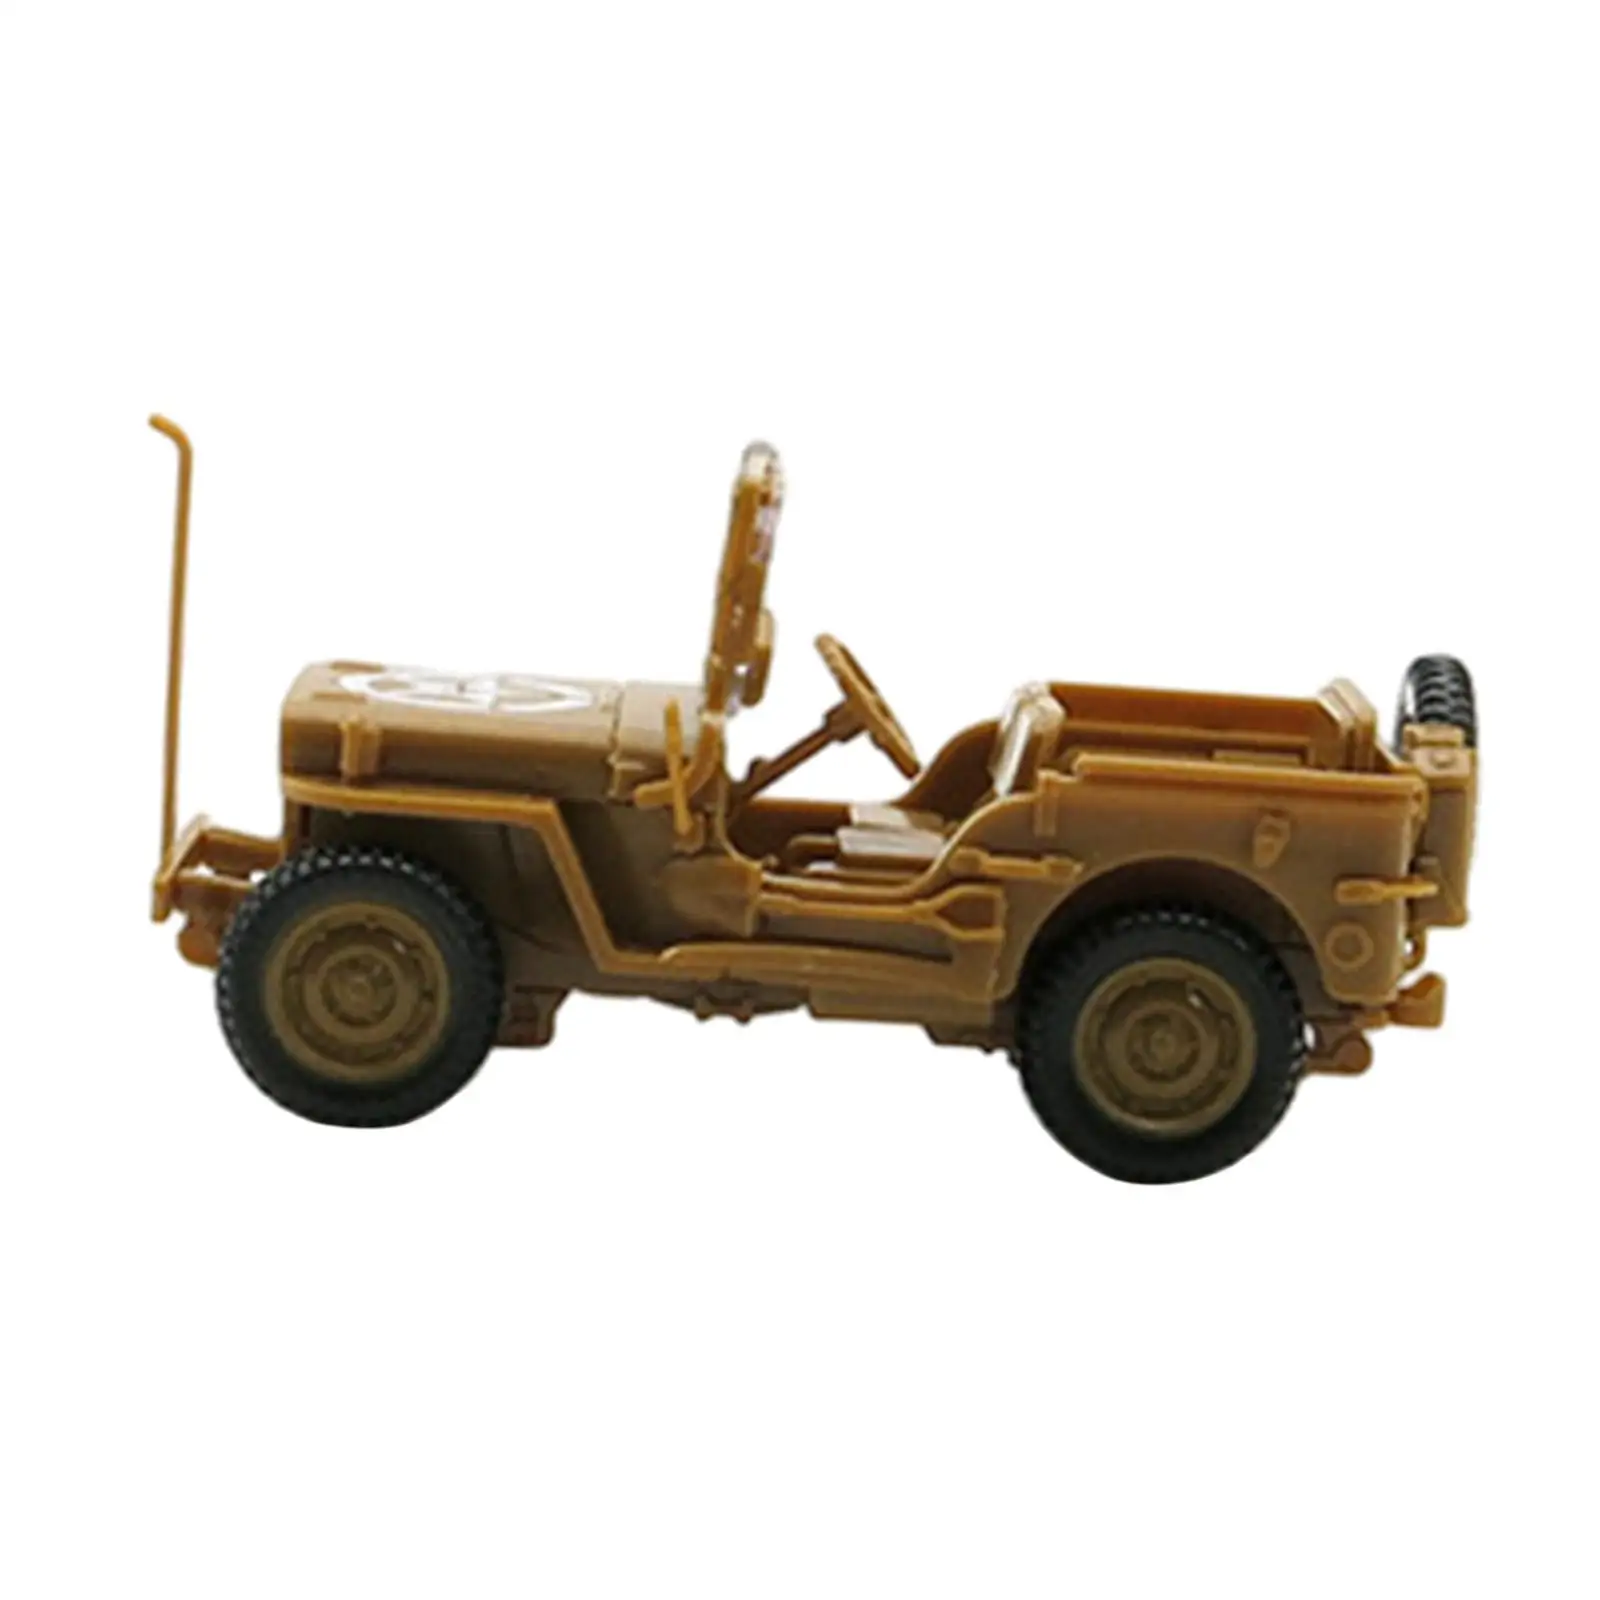 1/48 DIY Assembly Vehicle Model Desk Decor DIY Model Building Collection for Men Adults Friends Teens Holiday Gifts